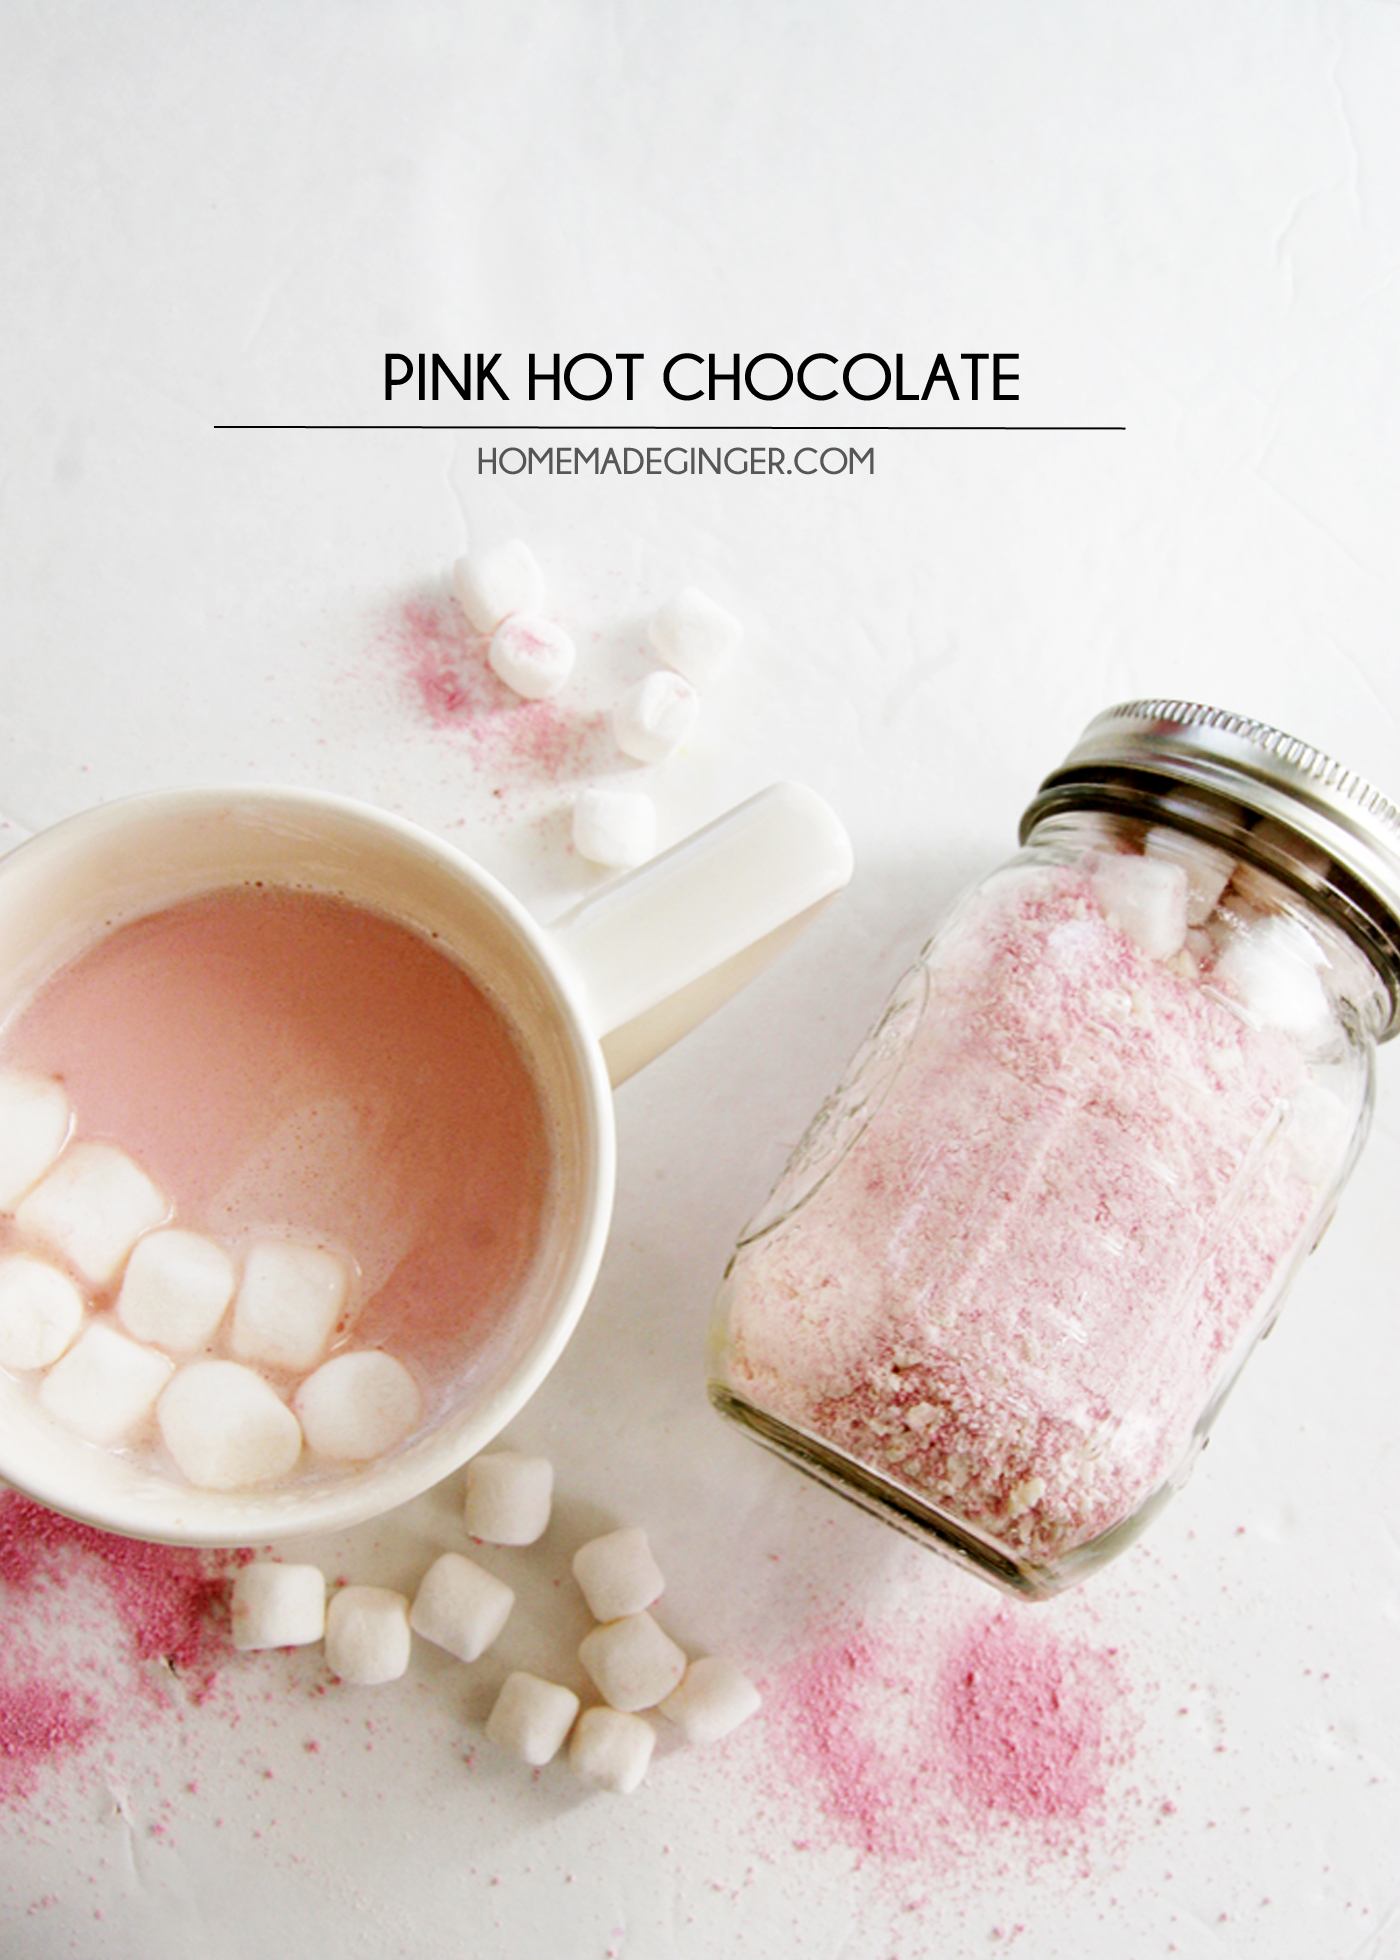 Delicious homemade pink hot chocolate